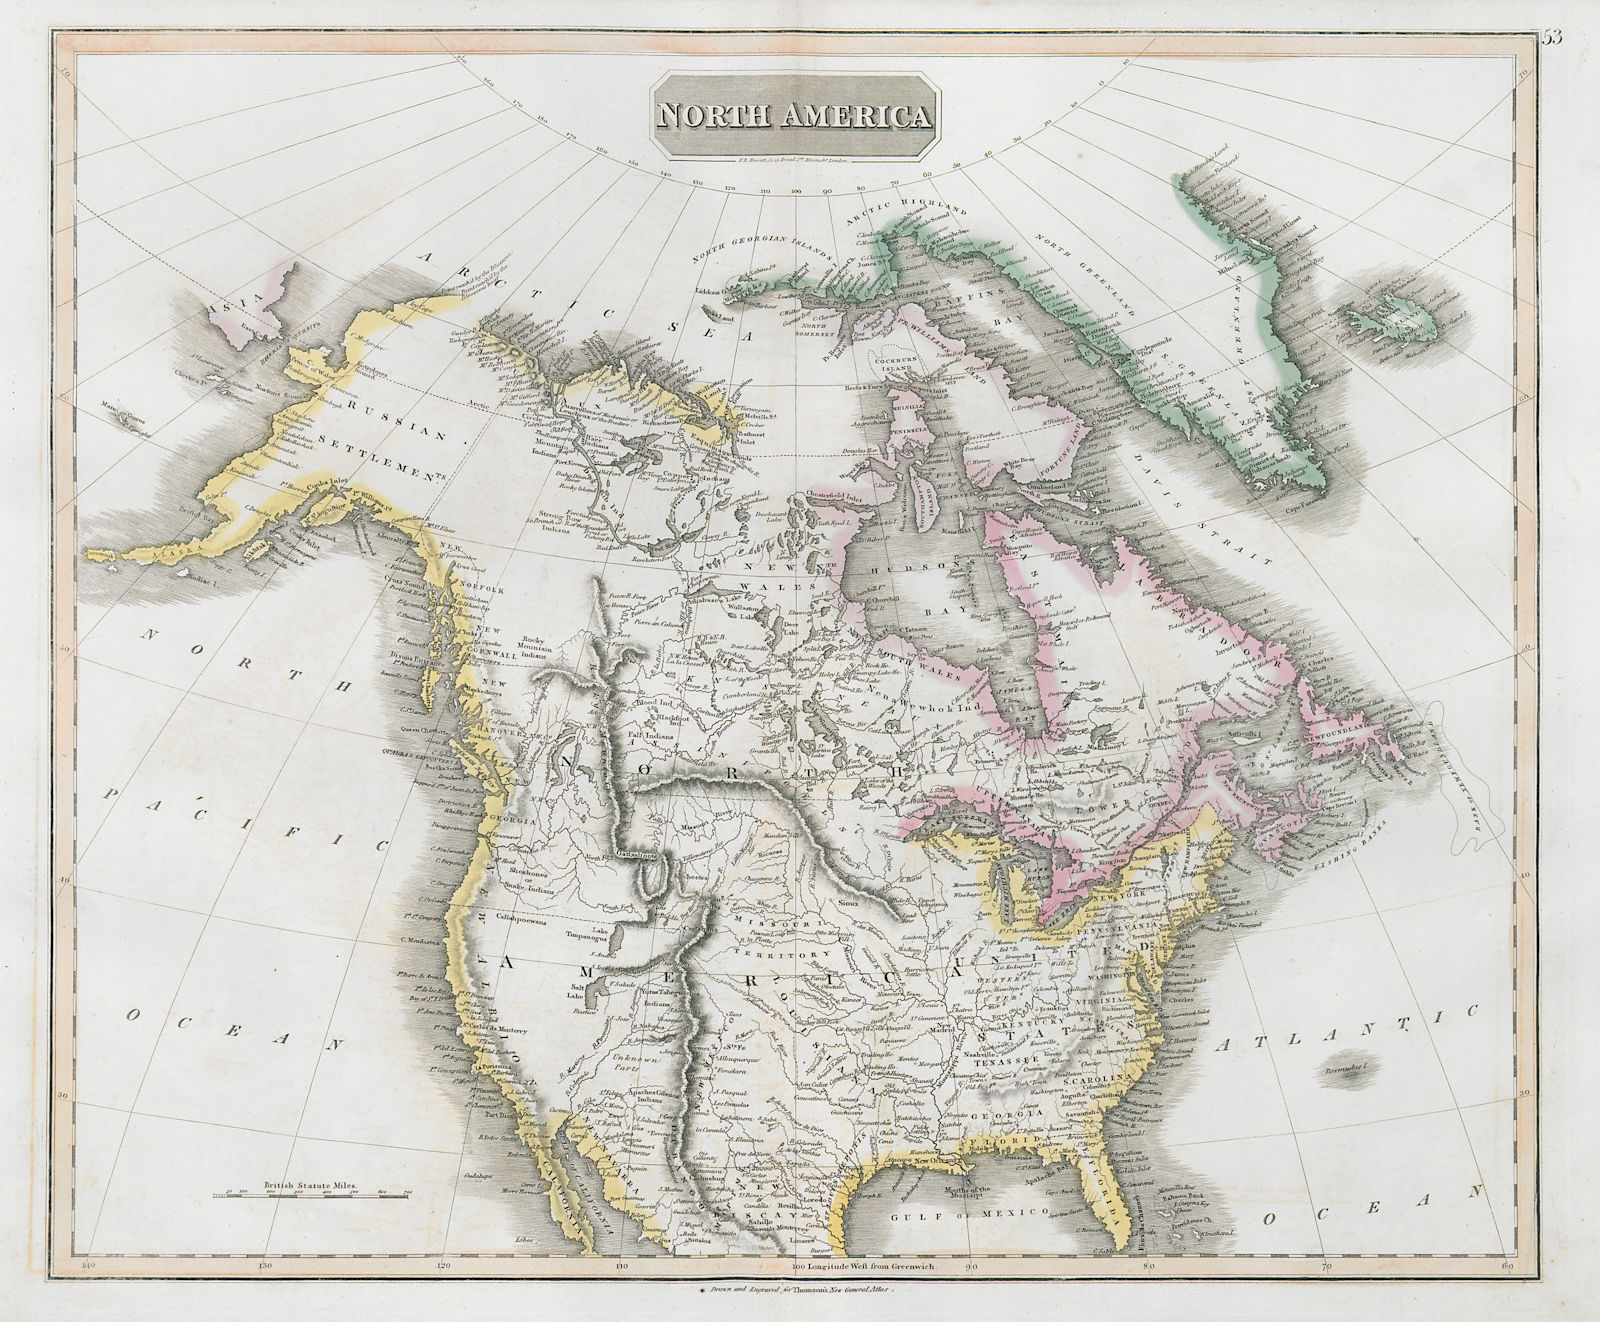 North America. Forts & trading posts. Assinipoel Mountains. THOMSON 1830 map